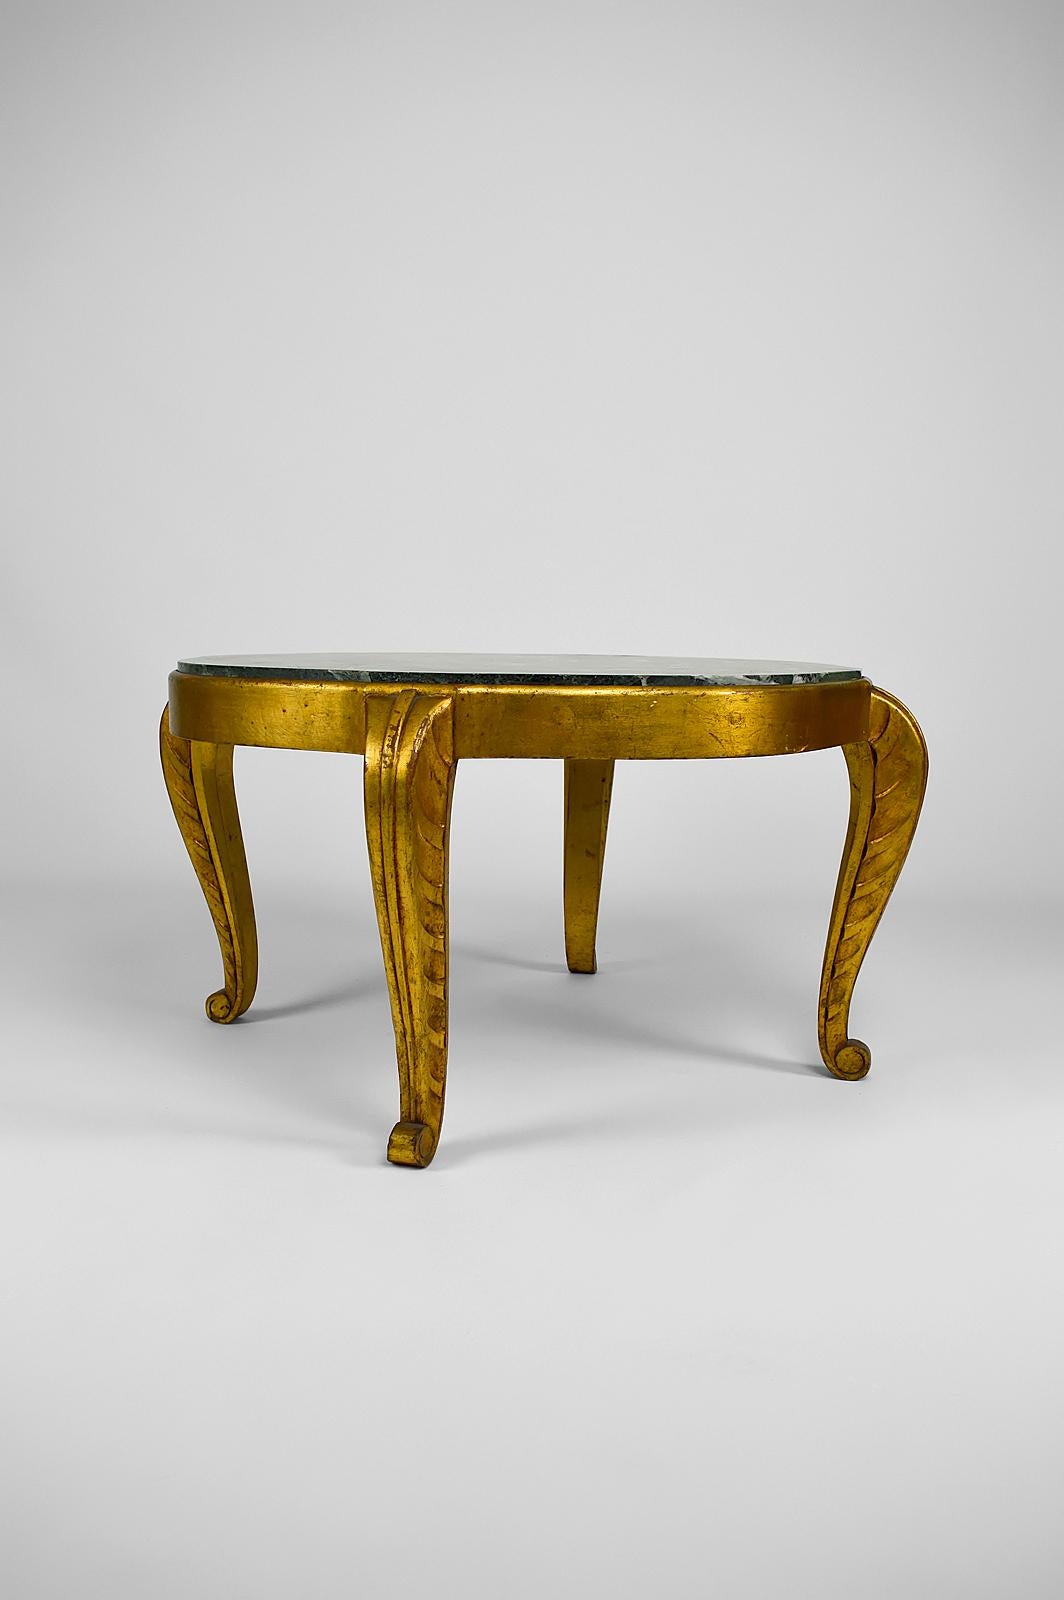 Gilded Side Table with Marble Top by Maison Jansen, Neoclassical Art Deco, 1940s For Sale 2